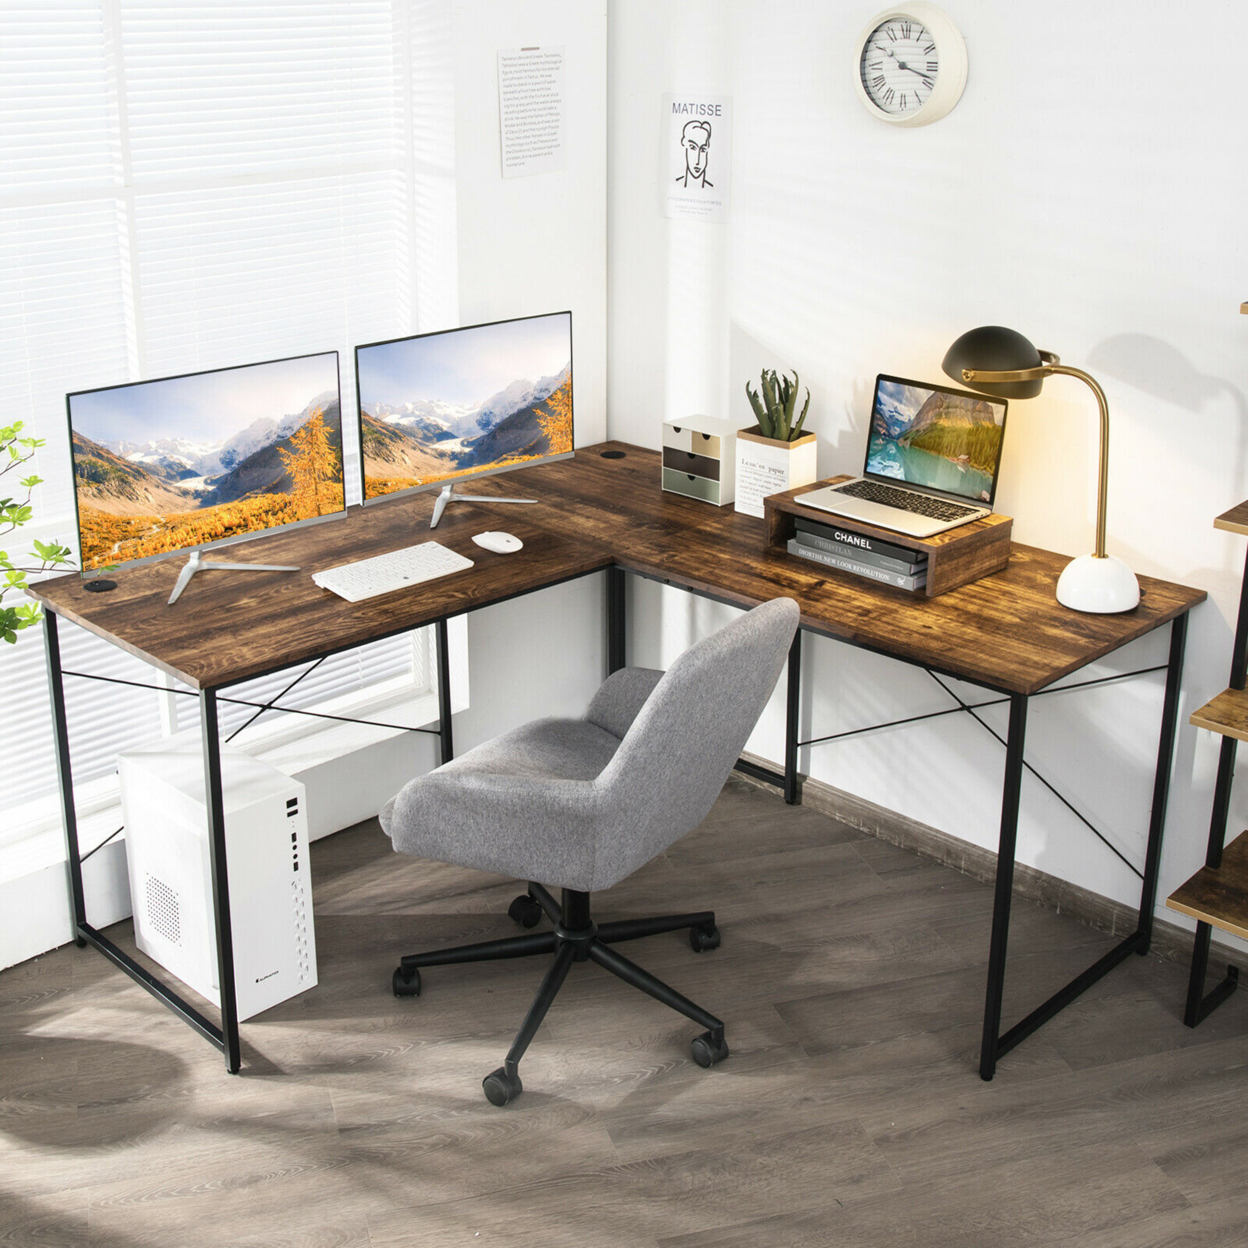 L-Shaped Reversible Computer Desk 2-Person Long Table W/Monitor Stand - Natural